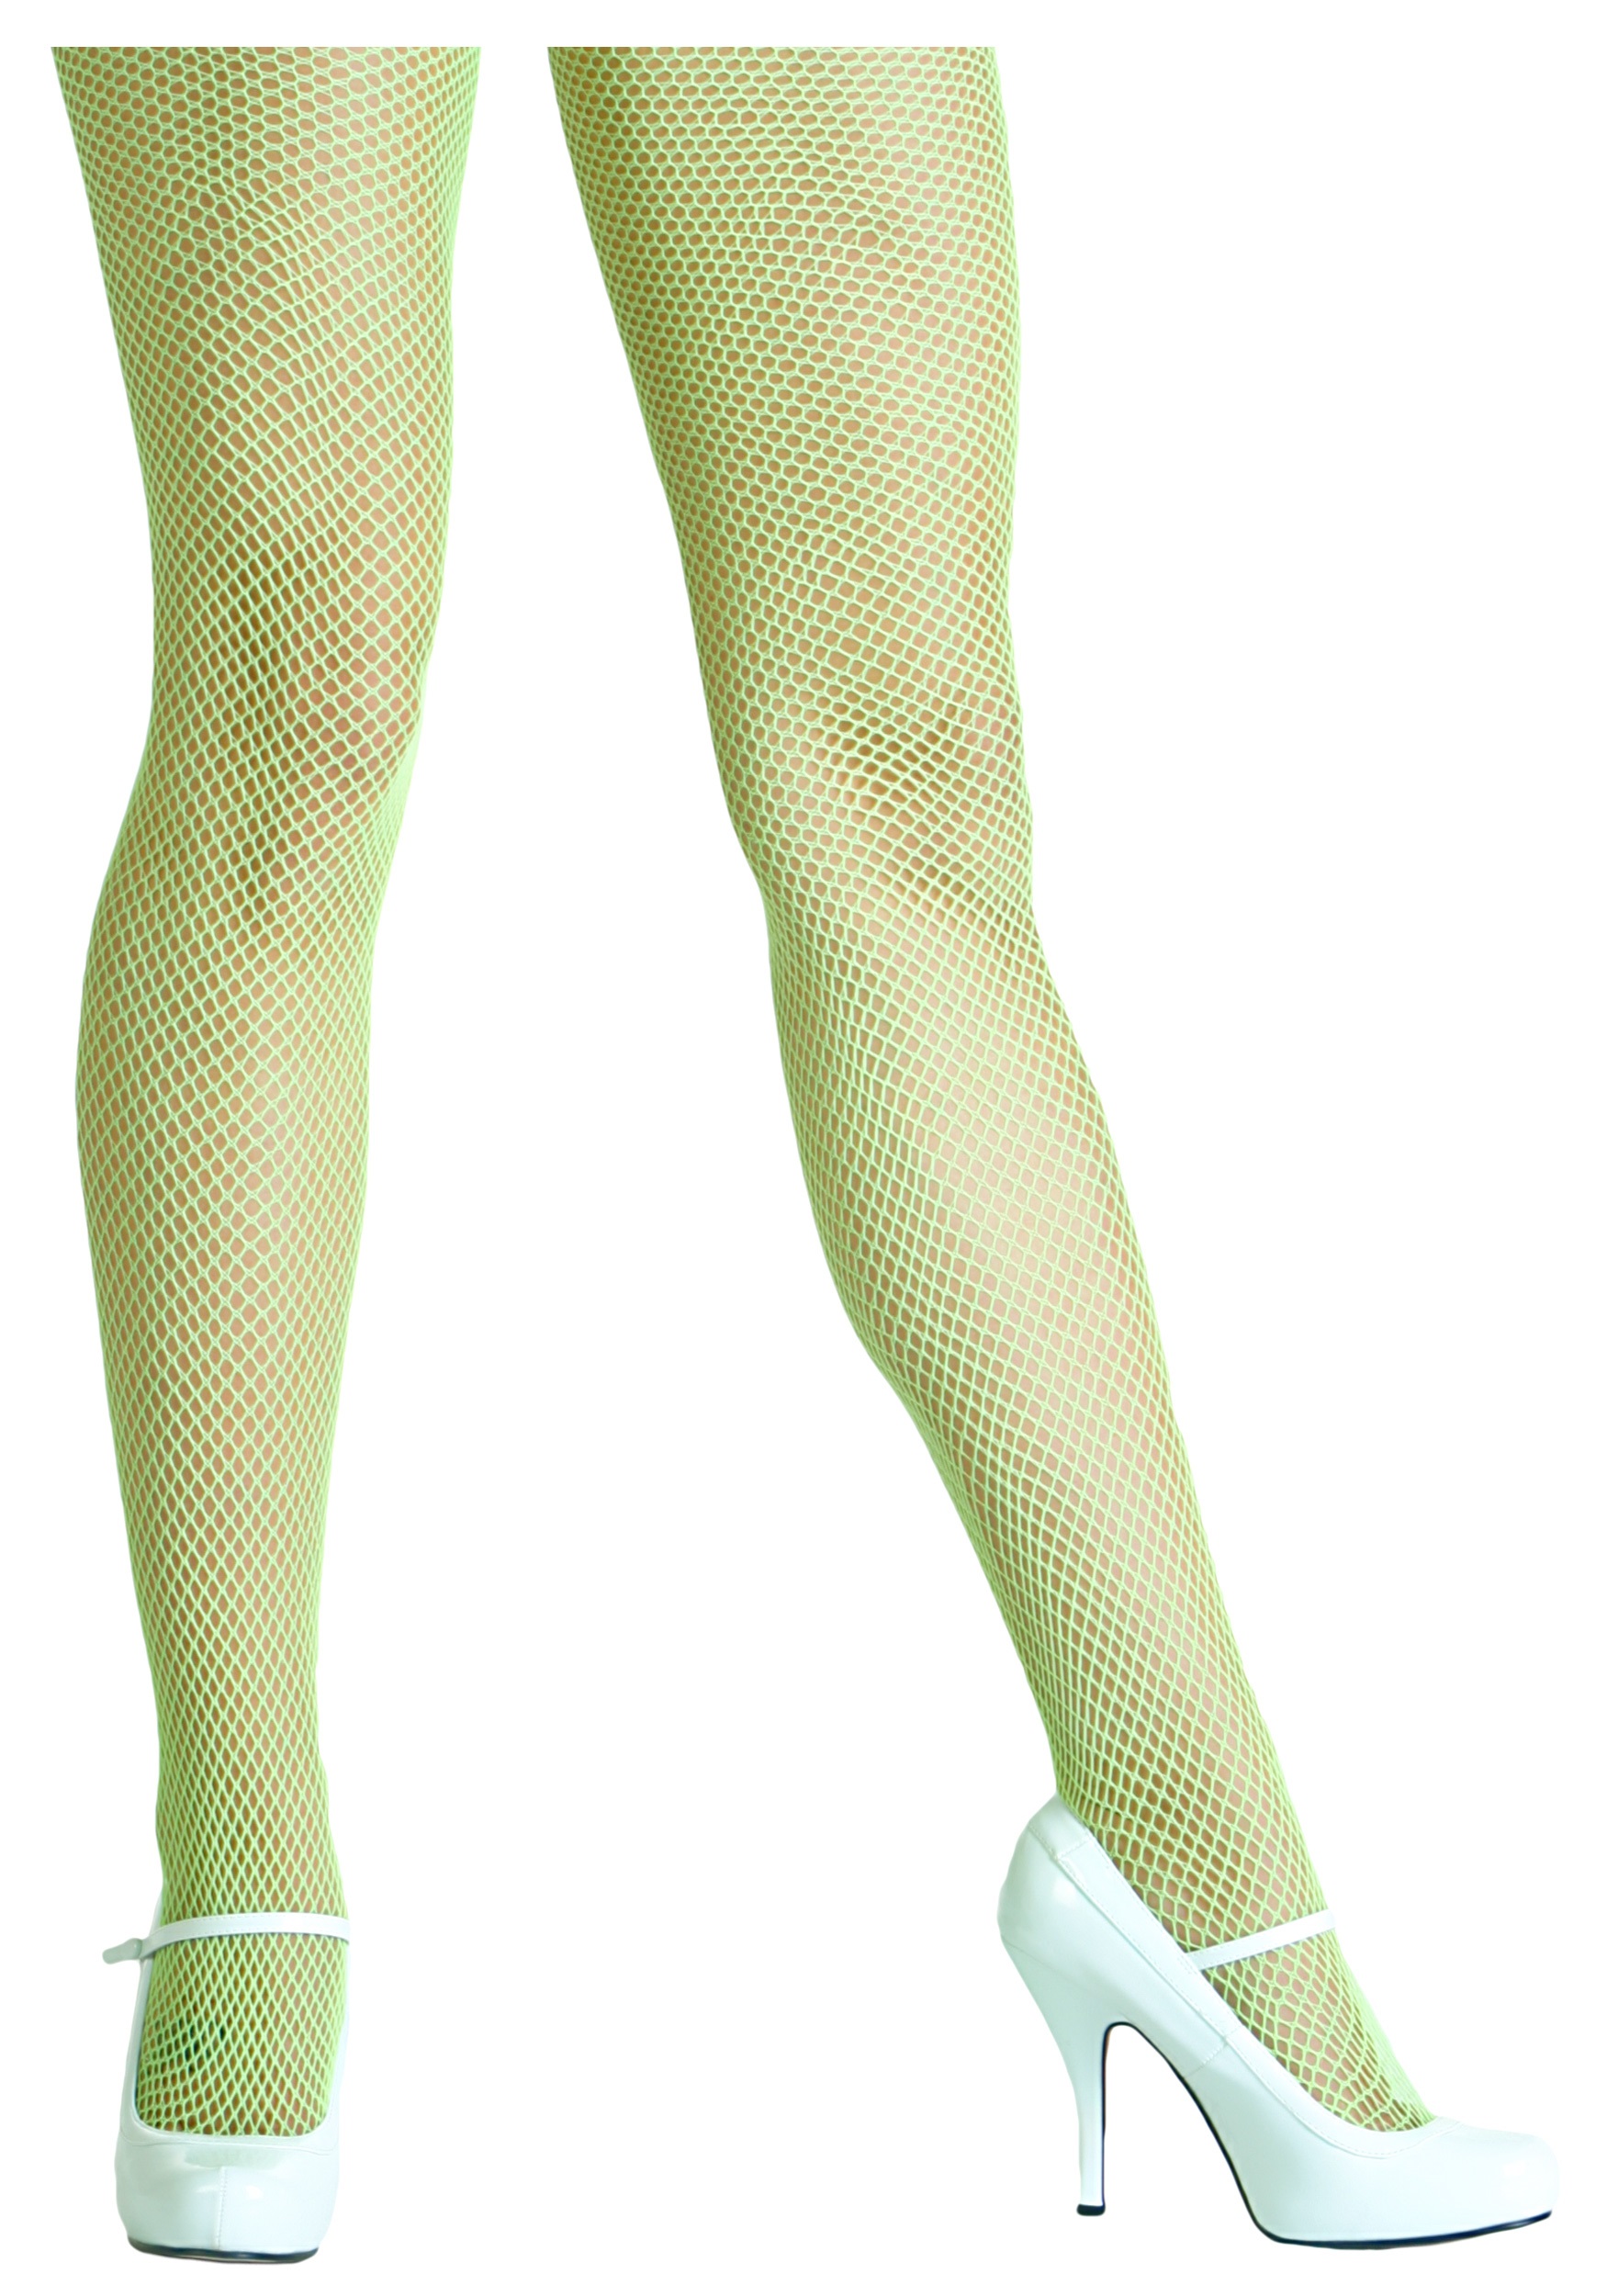 https://images.halloweencostumes.eu/products/6893/1-1/neon-green-fishnet-tights.jpg